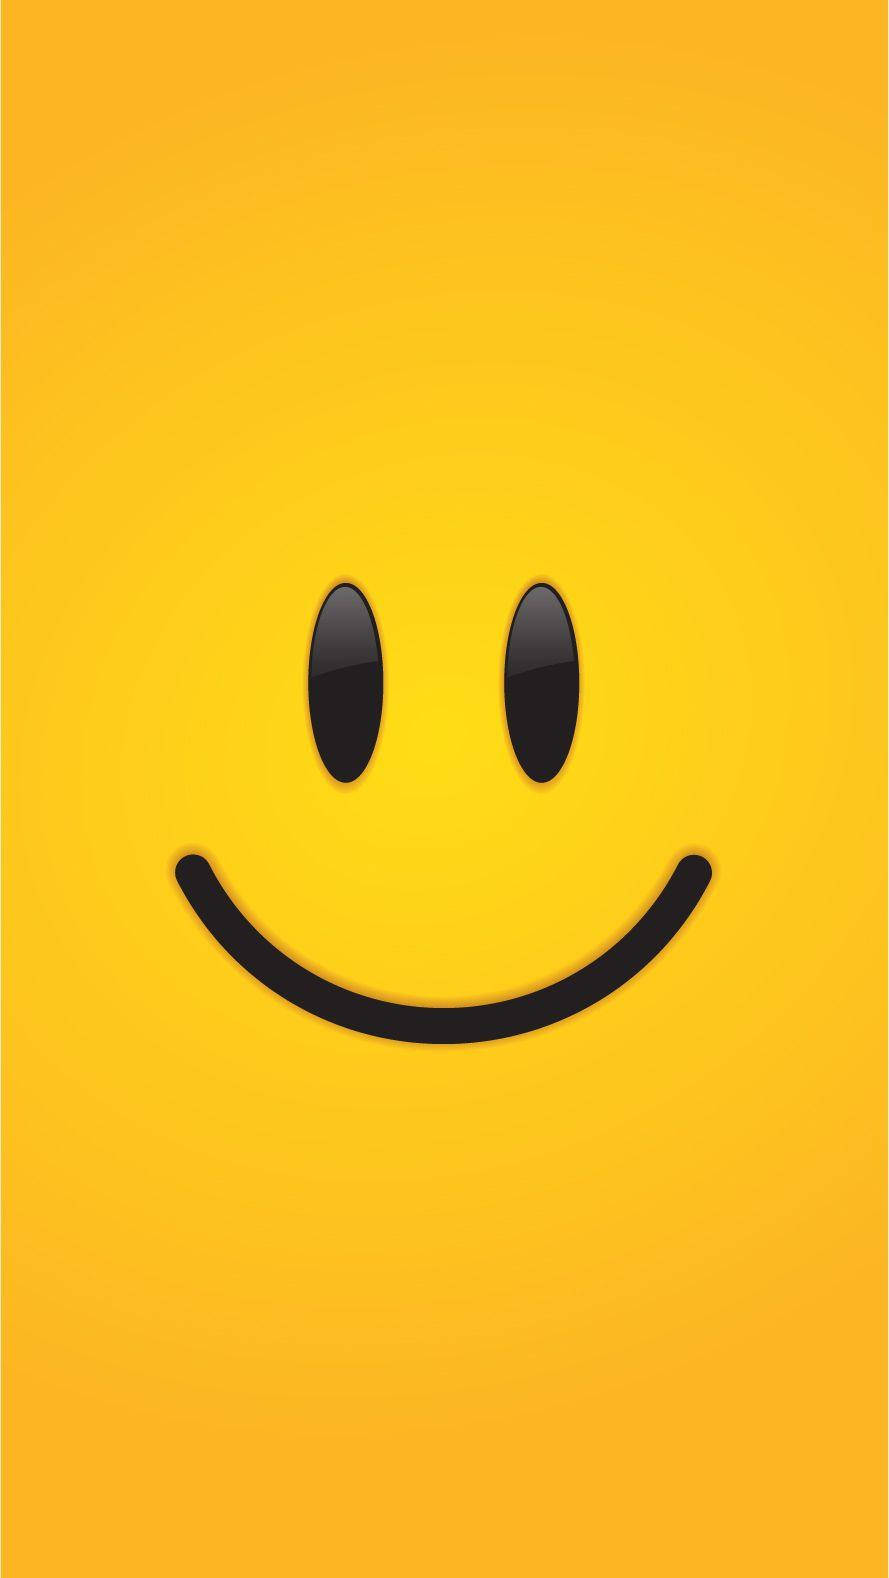 Simple Smiley Face On Yellow Background Wallpaper